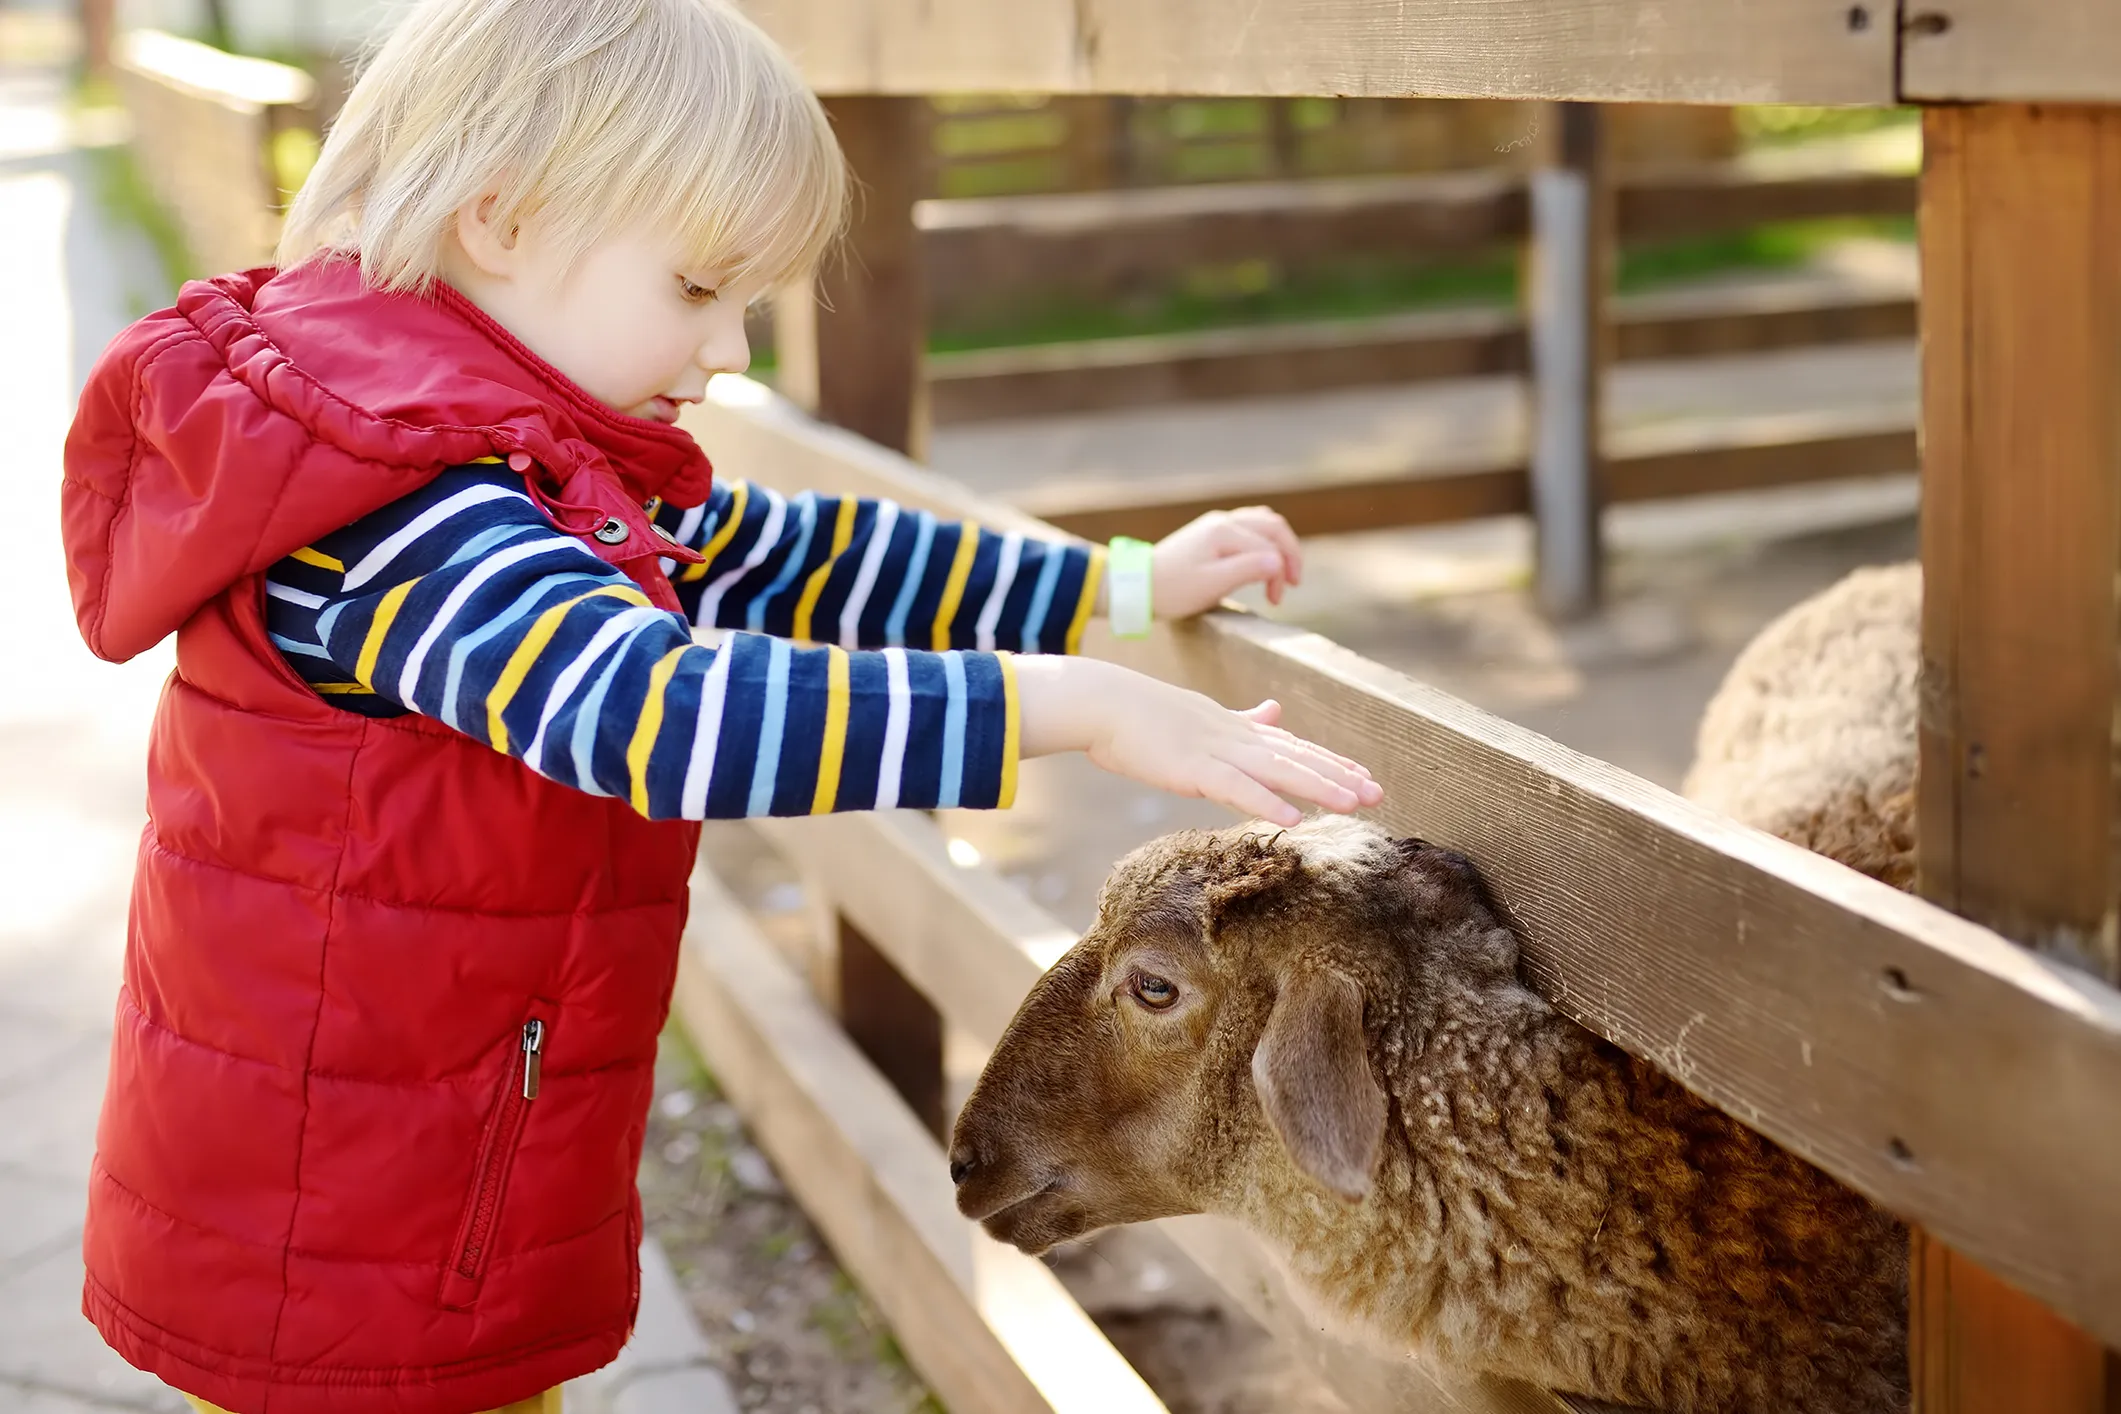 Child petting a sheep through a wooden fence on a farm.